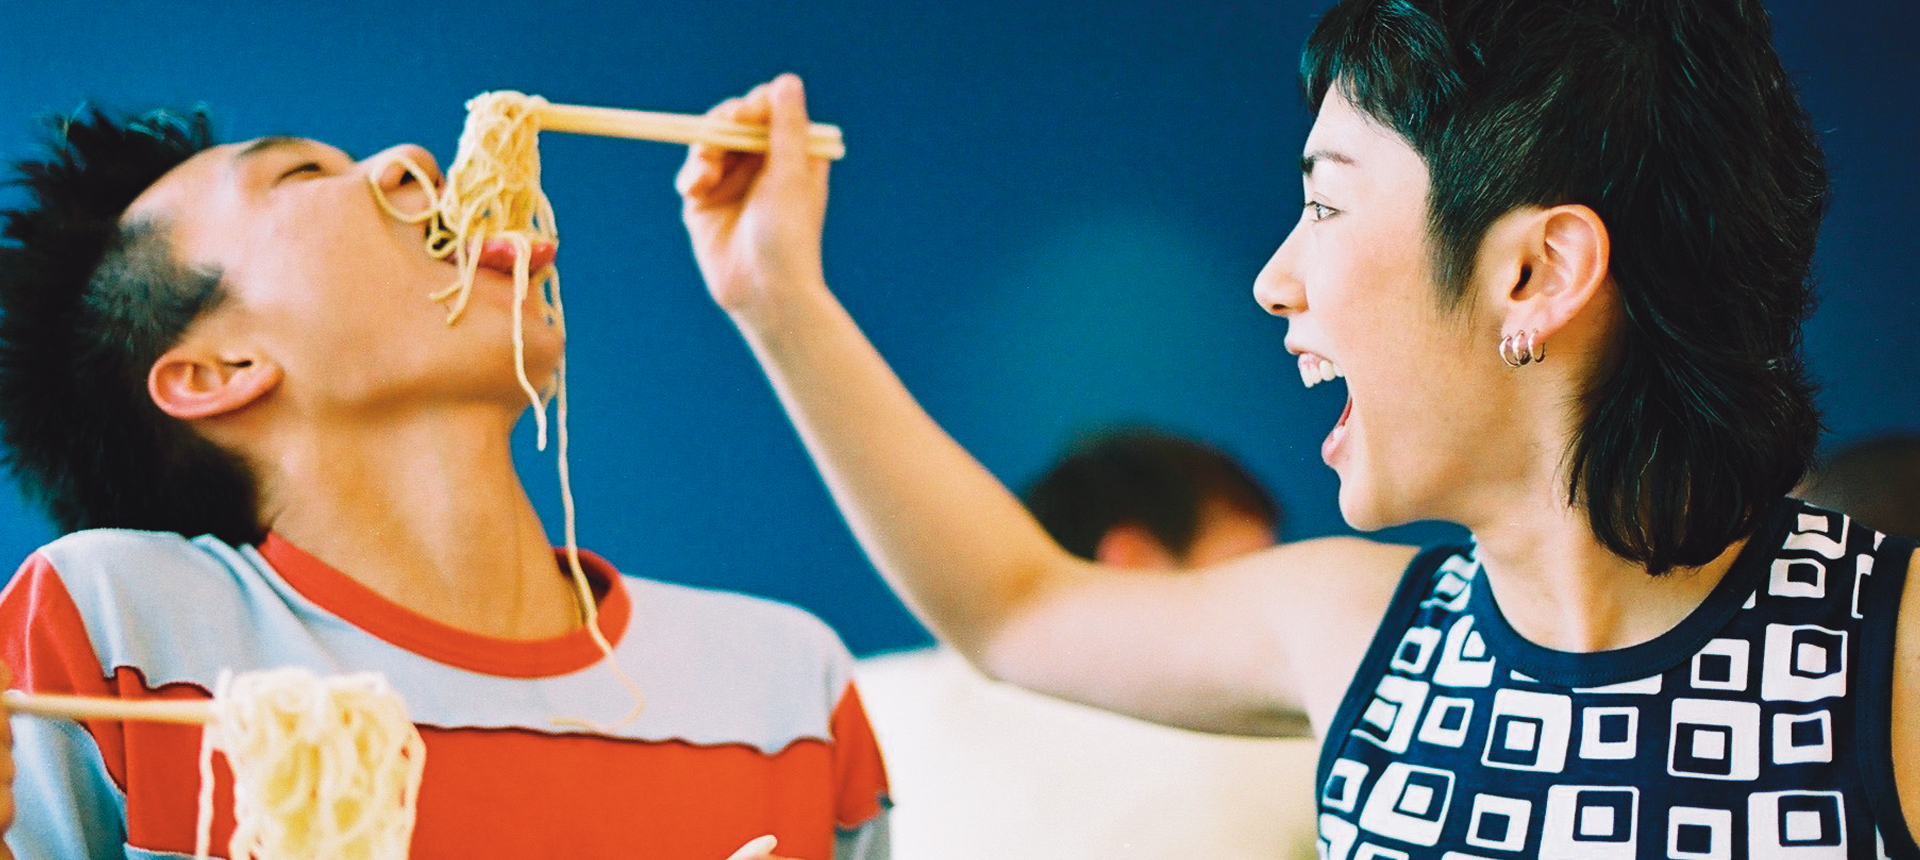 Brand strategy and guidelines for food and restaurant brand Wagamama UK launch.